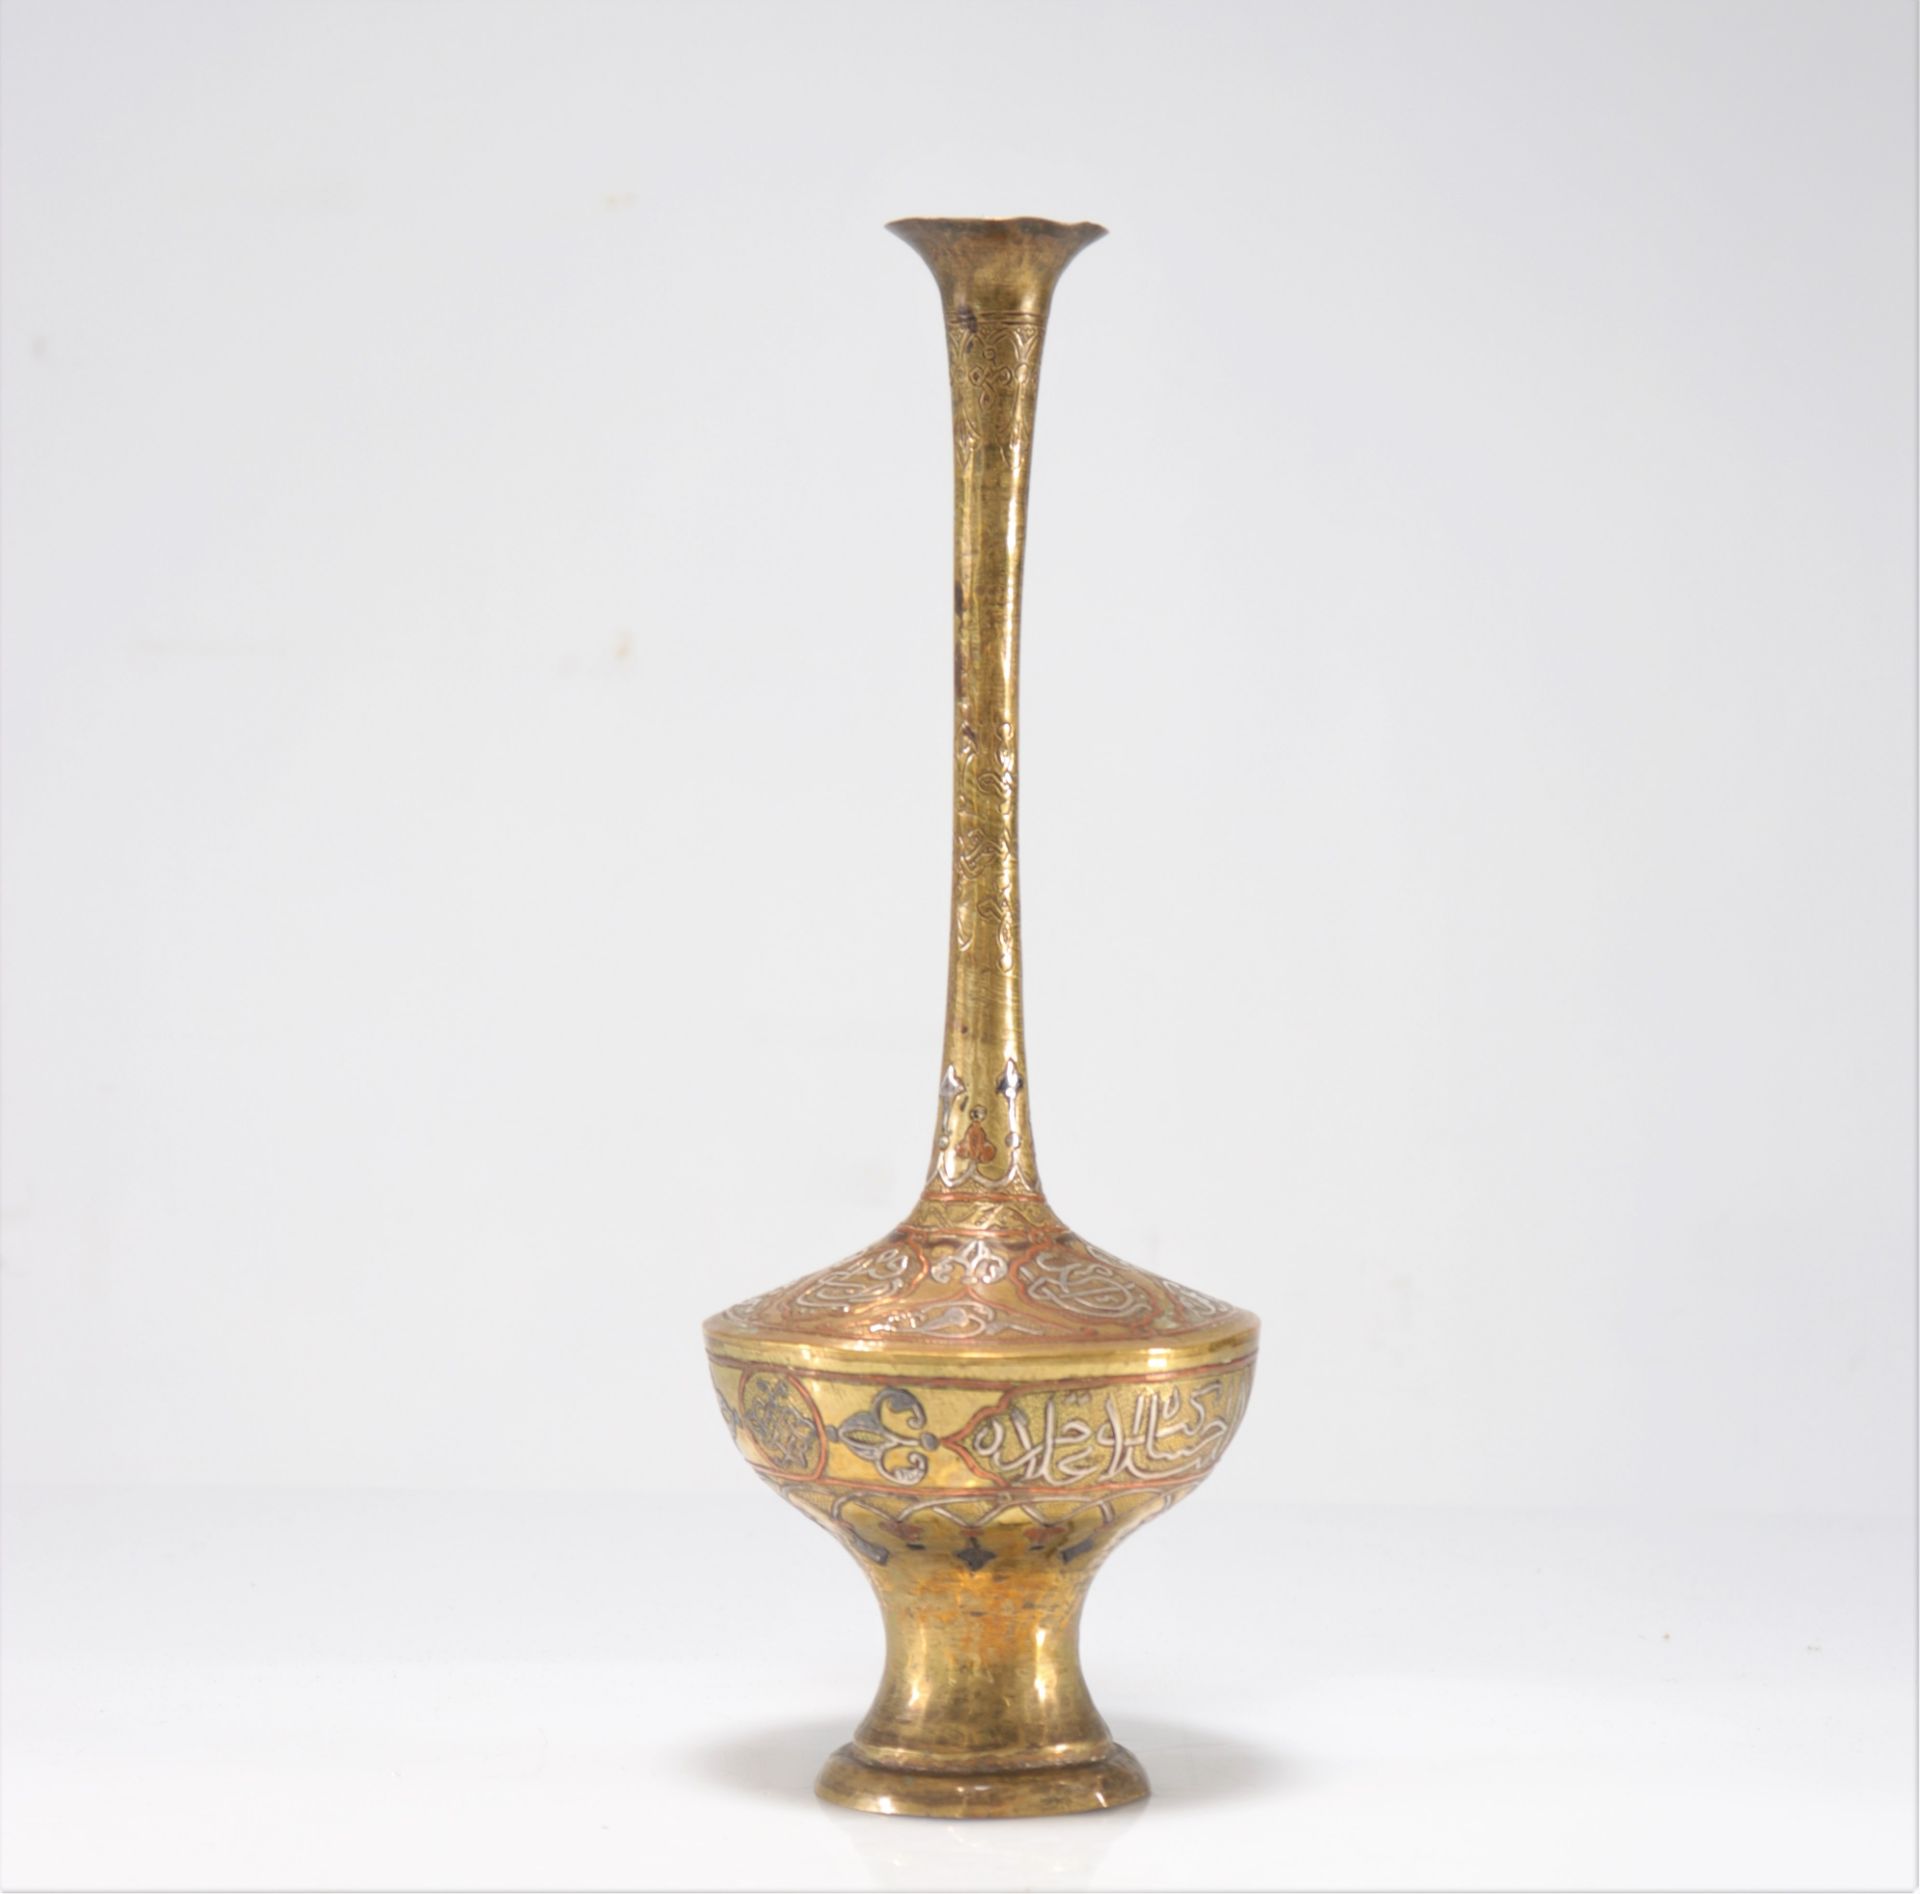 Ottoman vase brass and silver and copper inlay "Cairowe" - Image 2 of 5